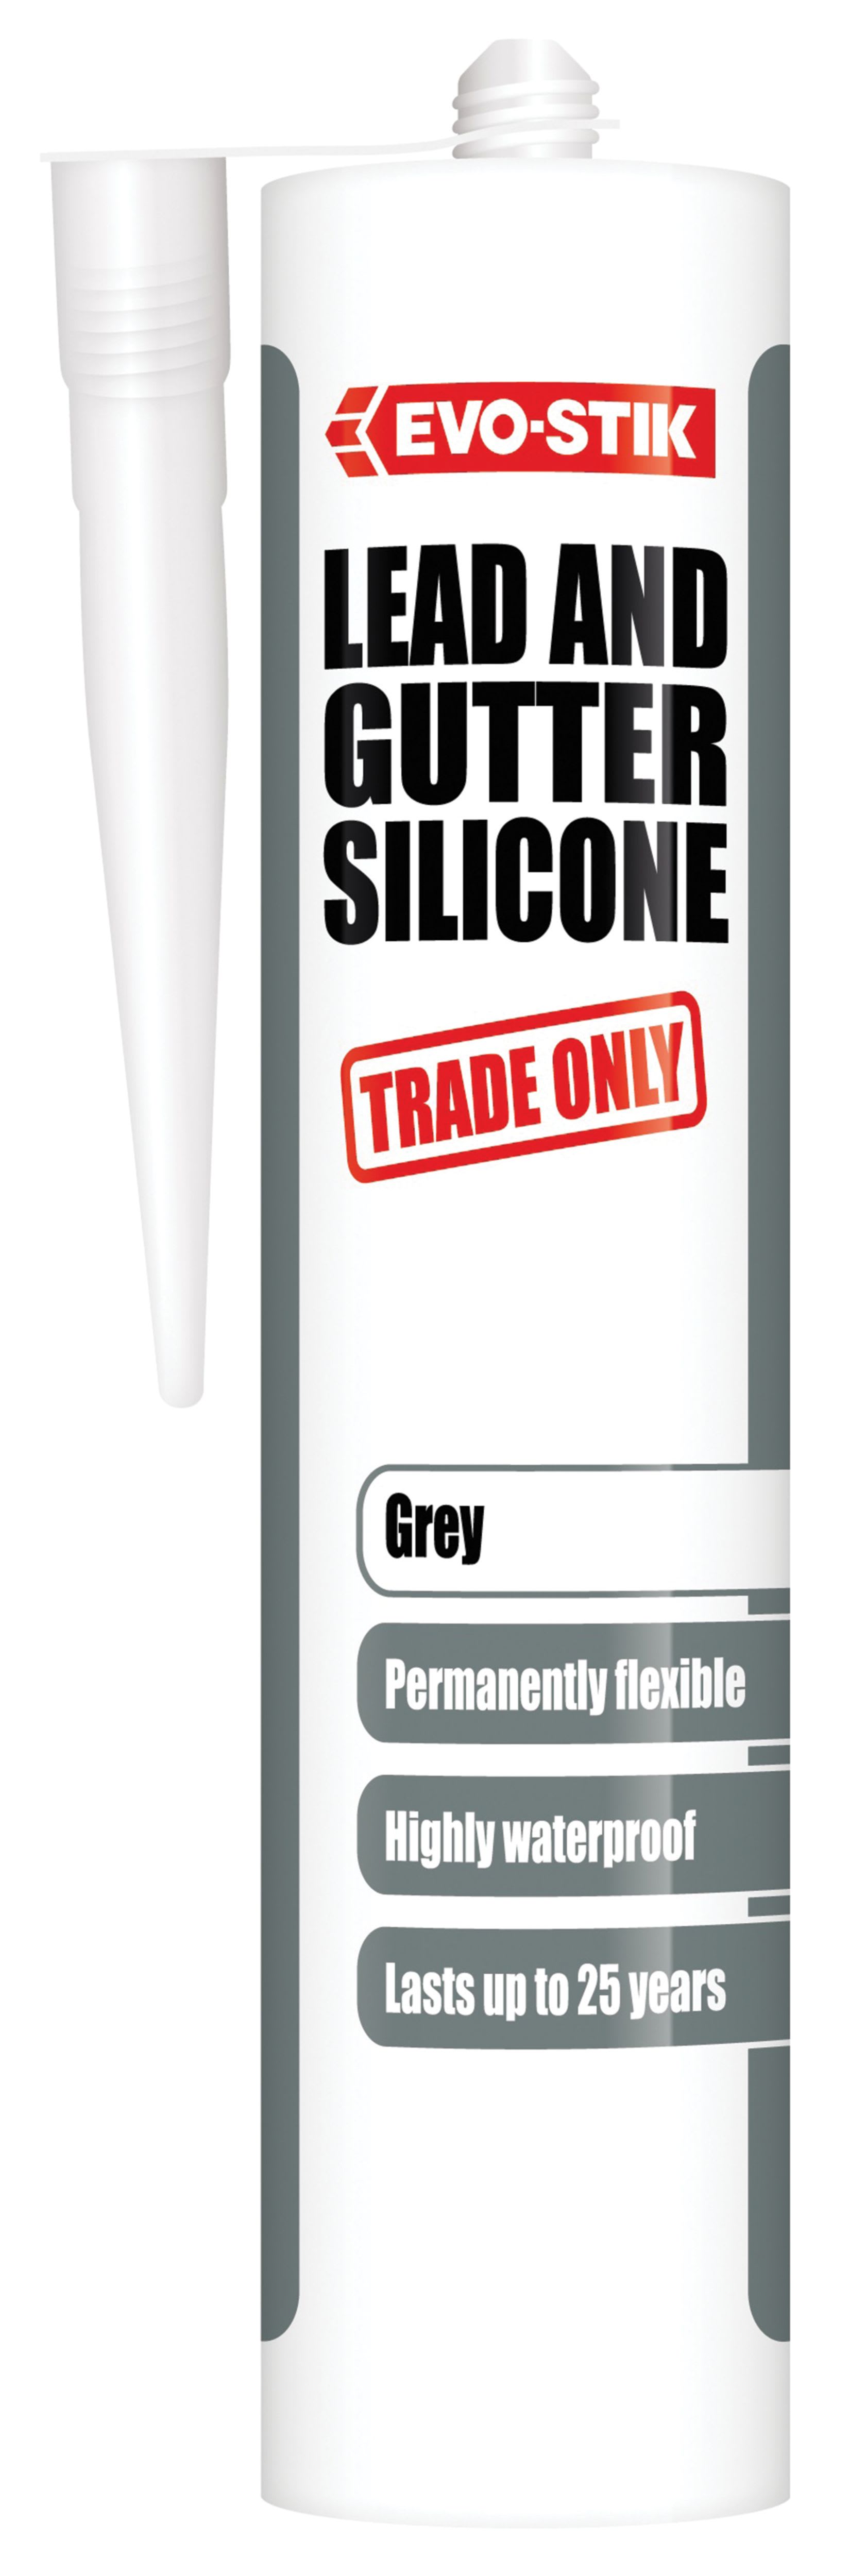 Evo-Stik Trade Only Lead & Gutter Silicone -